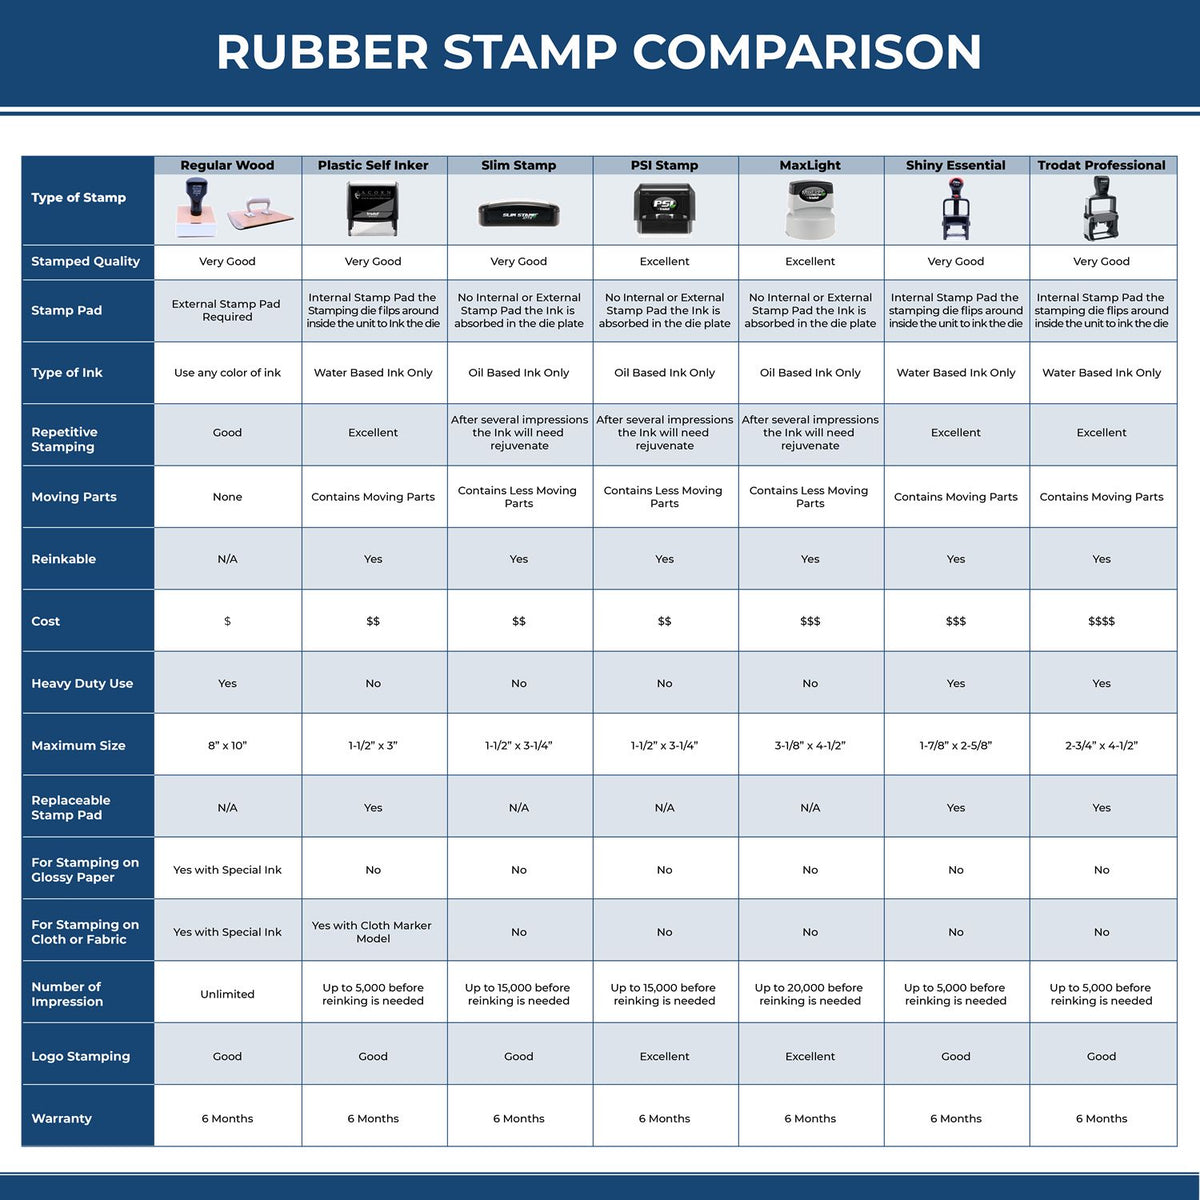 Large Paid with Dollar Sign Rubber Stamp 4906R Rubber Stamp Comparison